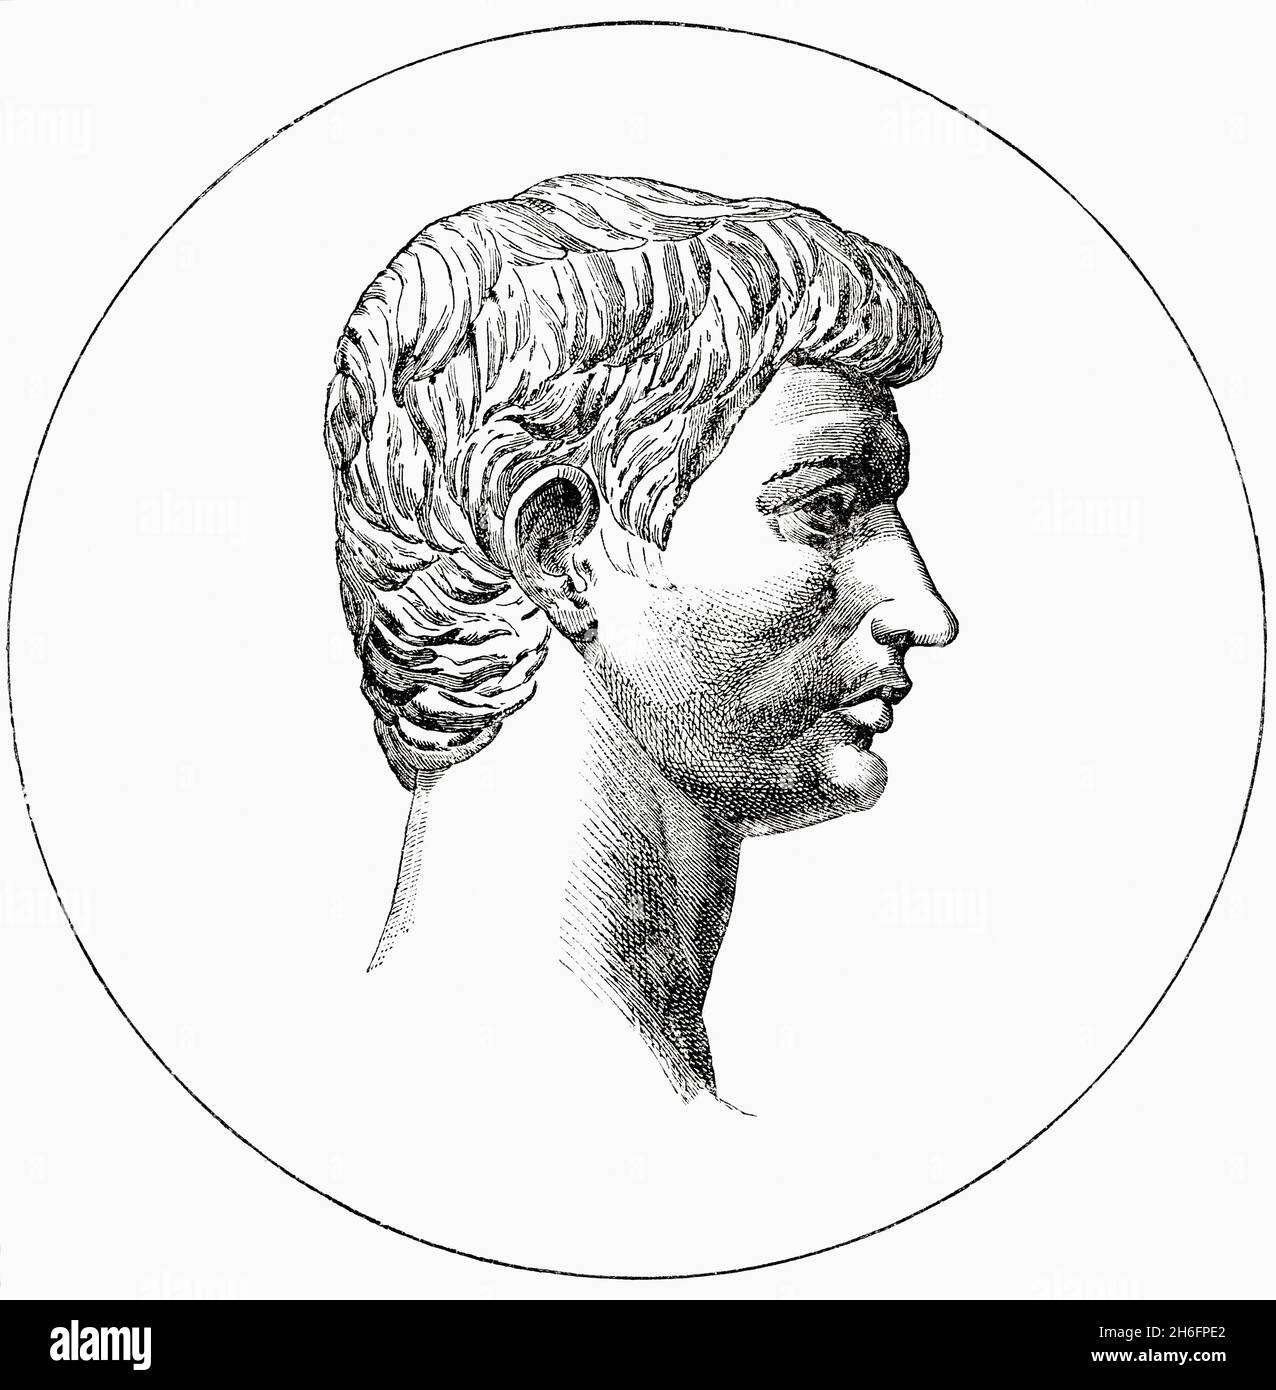 Marcus Junius Brutus, 85 BC – 42 BC, aka Brutus.  Roman politician, orator and one of the assassins of Julius Caesar.  From Cassell's Illustrated Universal History, published 1883. Stock Photo